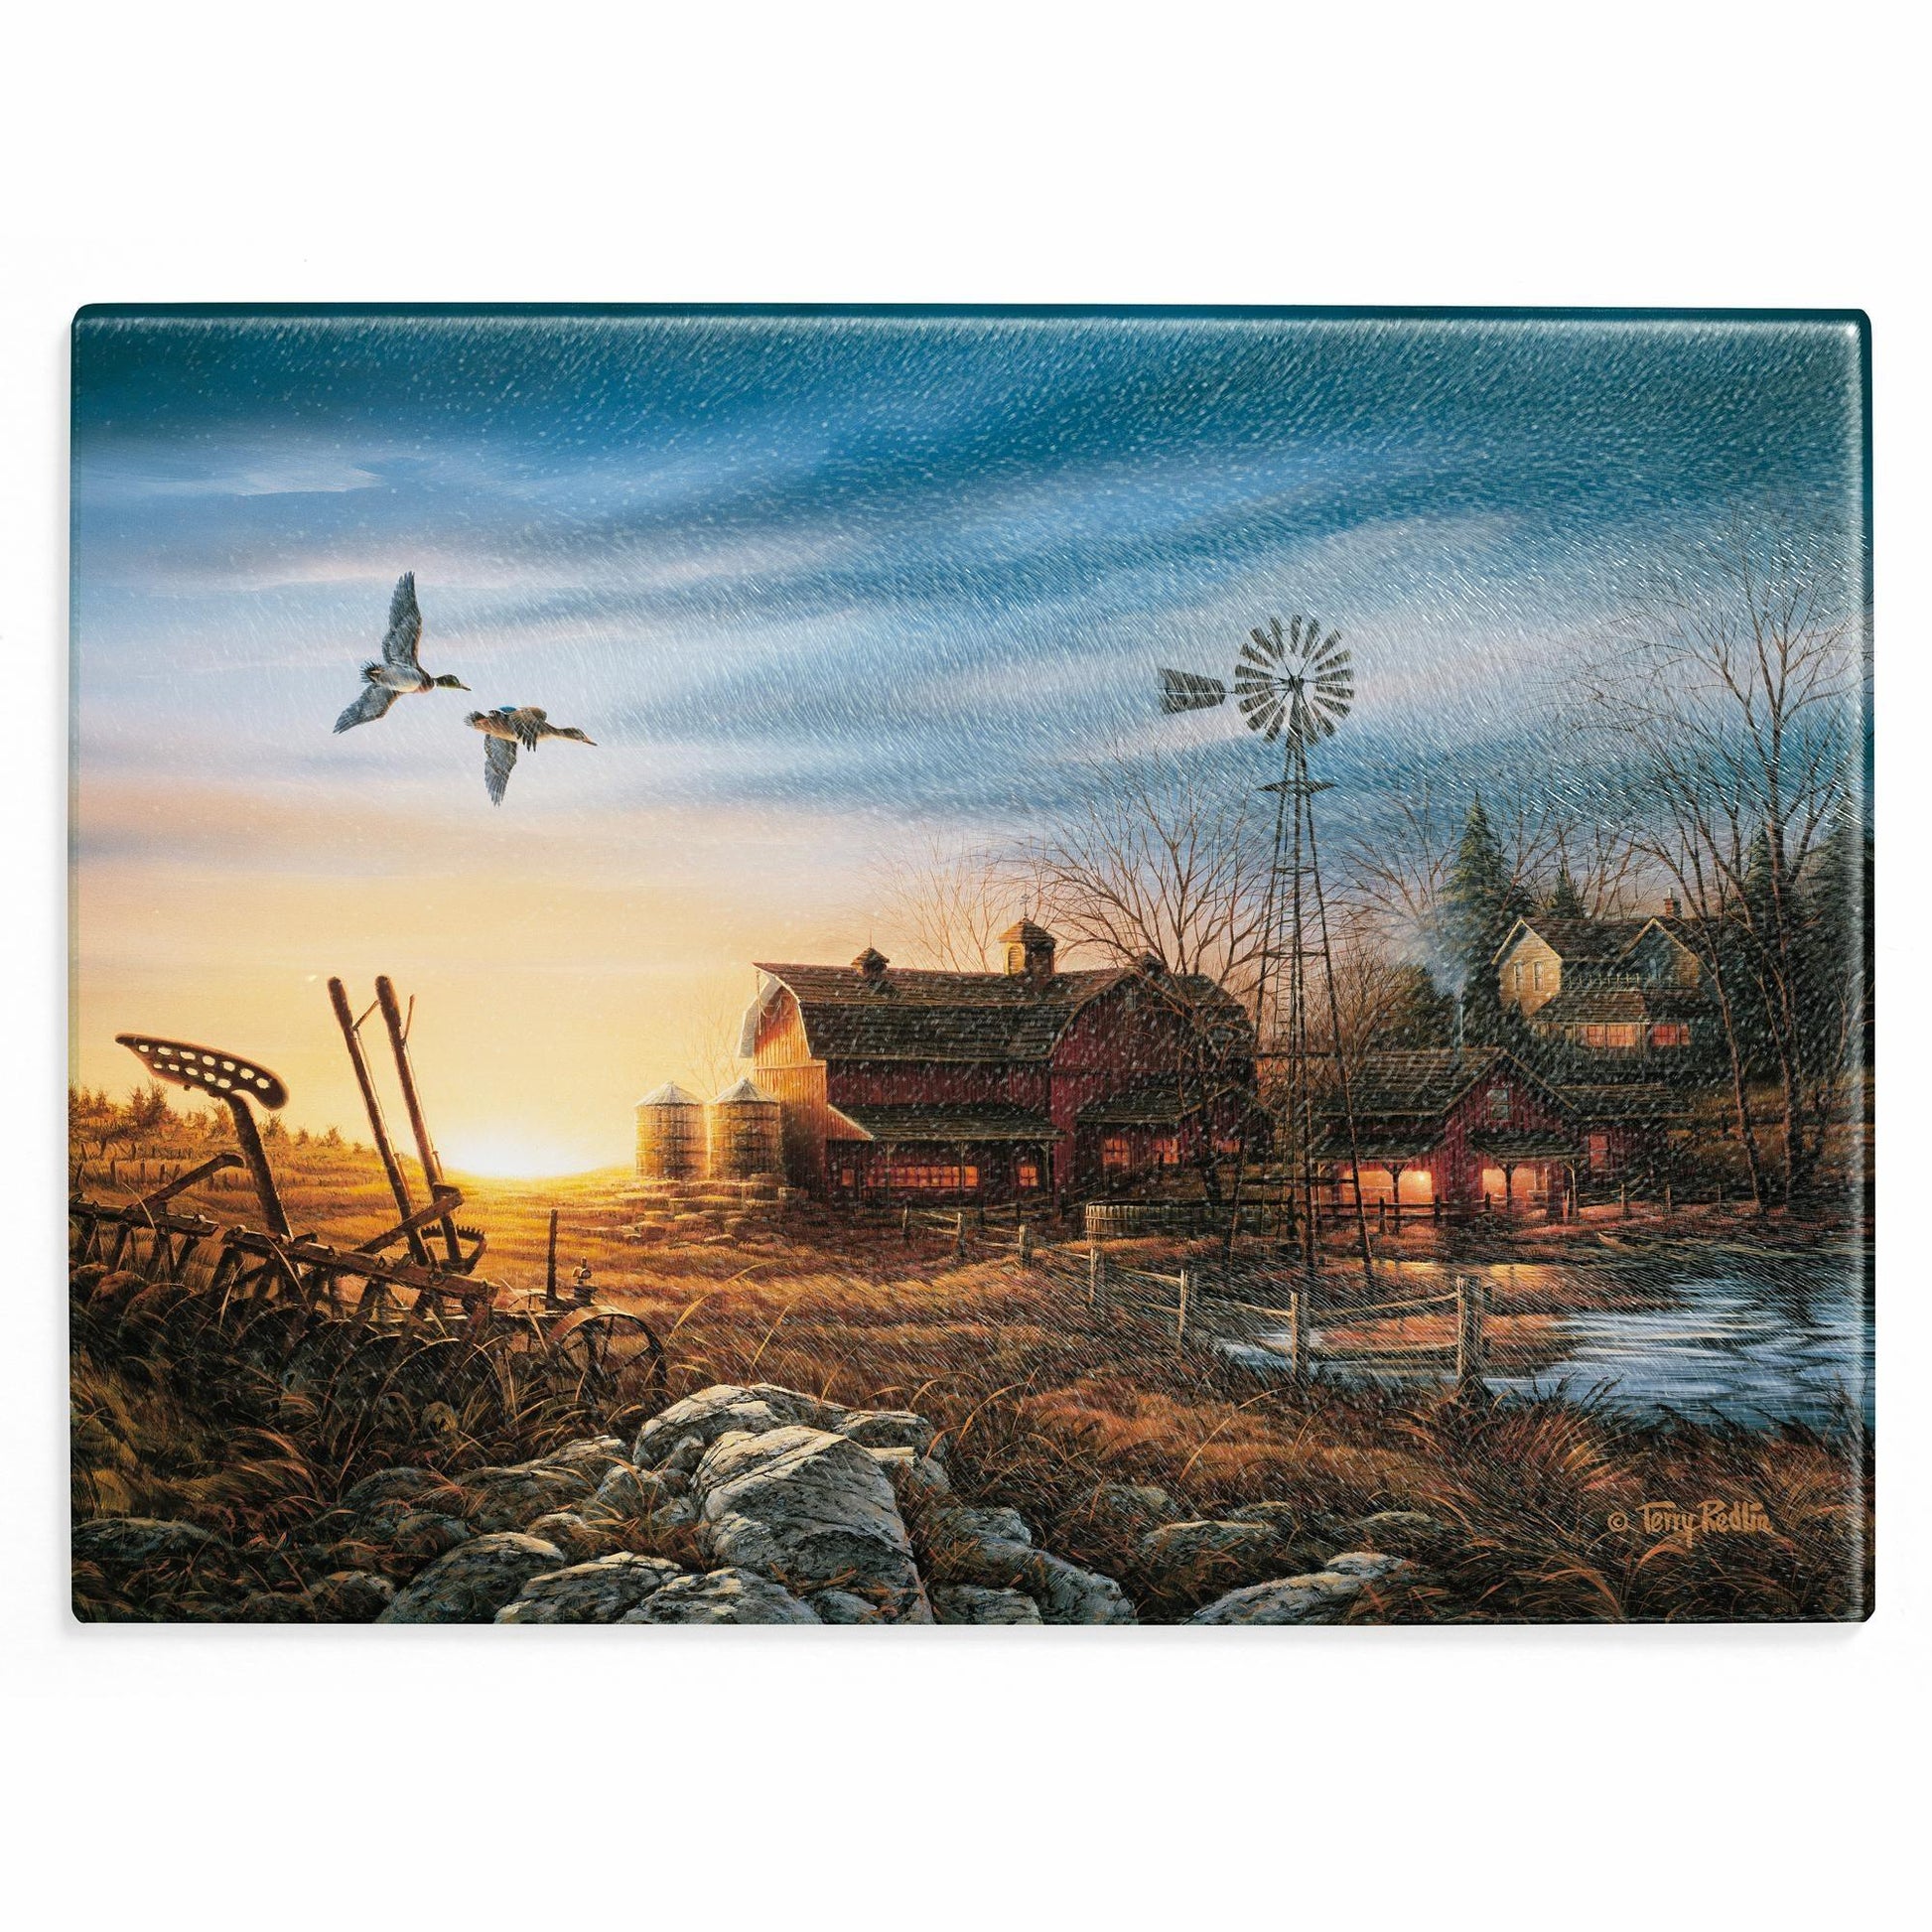 Evening Chores Cutting Board - Wild Wings